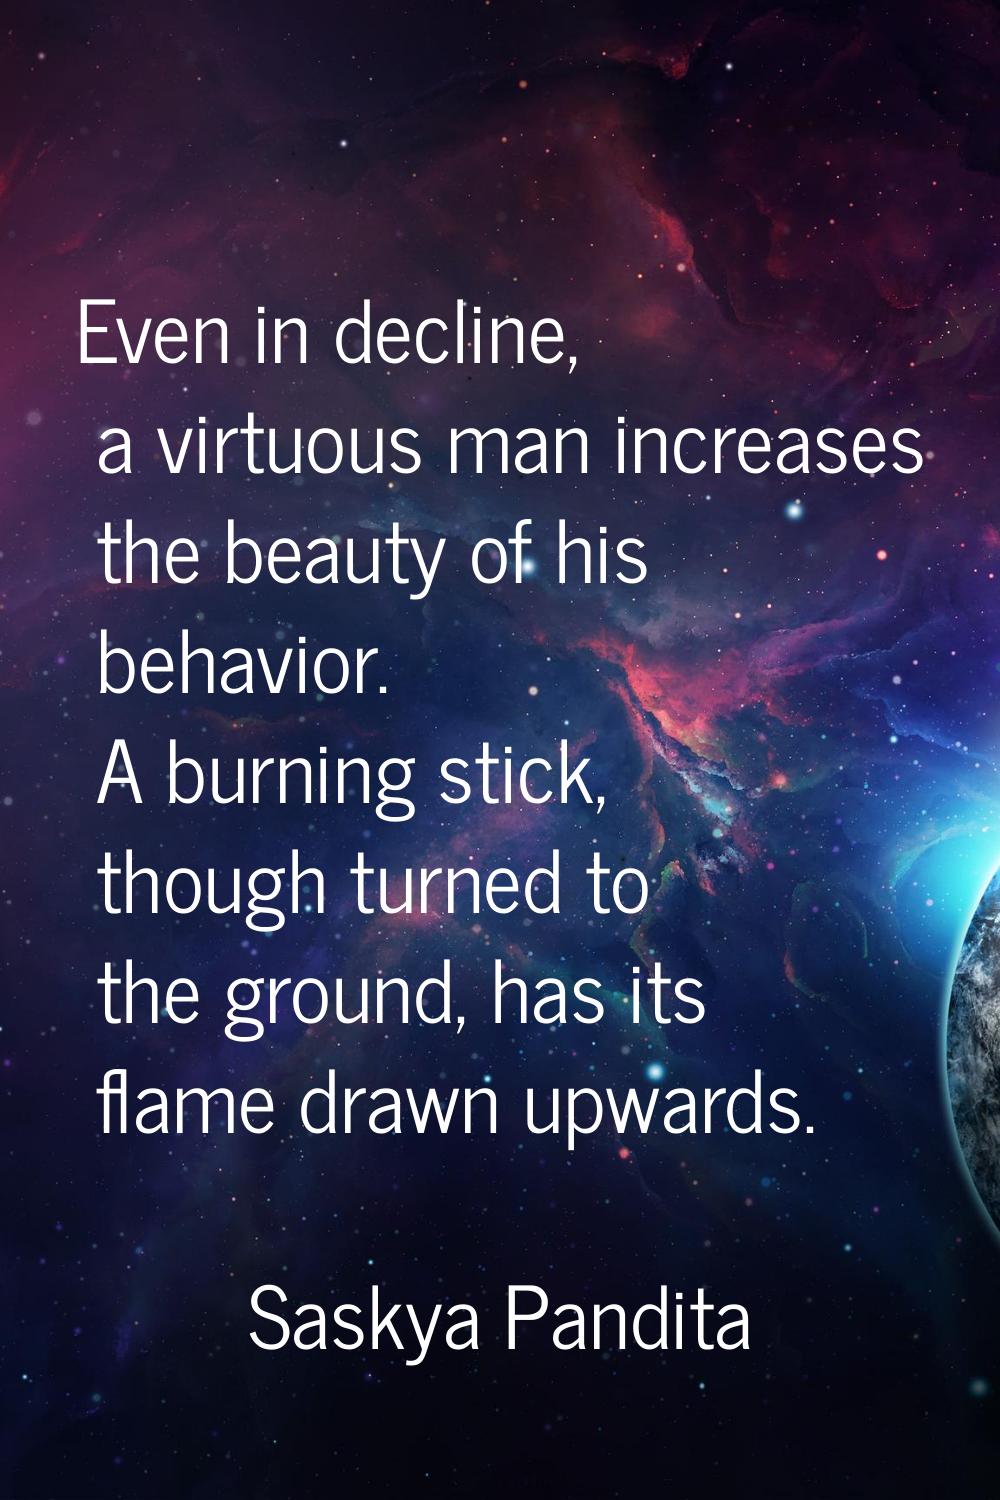 Even in decline, a virtuous man increases the beauty of his behavior. A burning stick, though turne